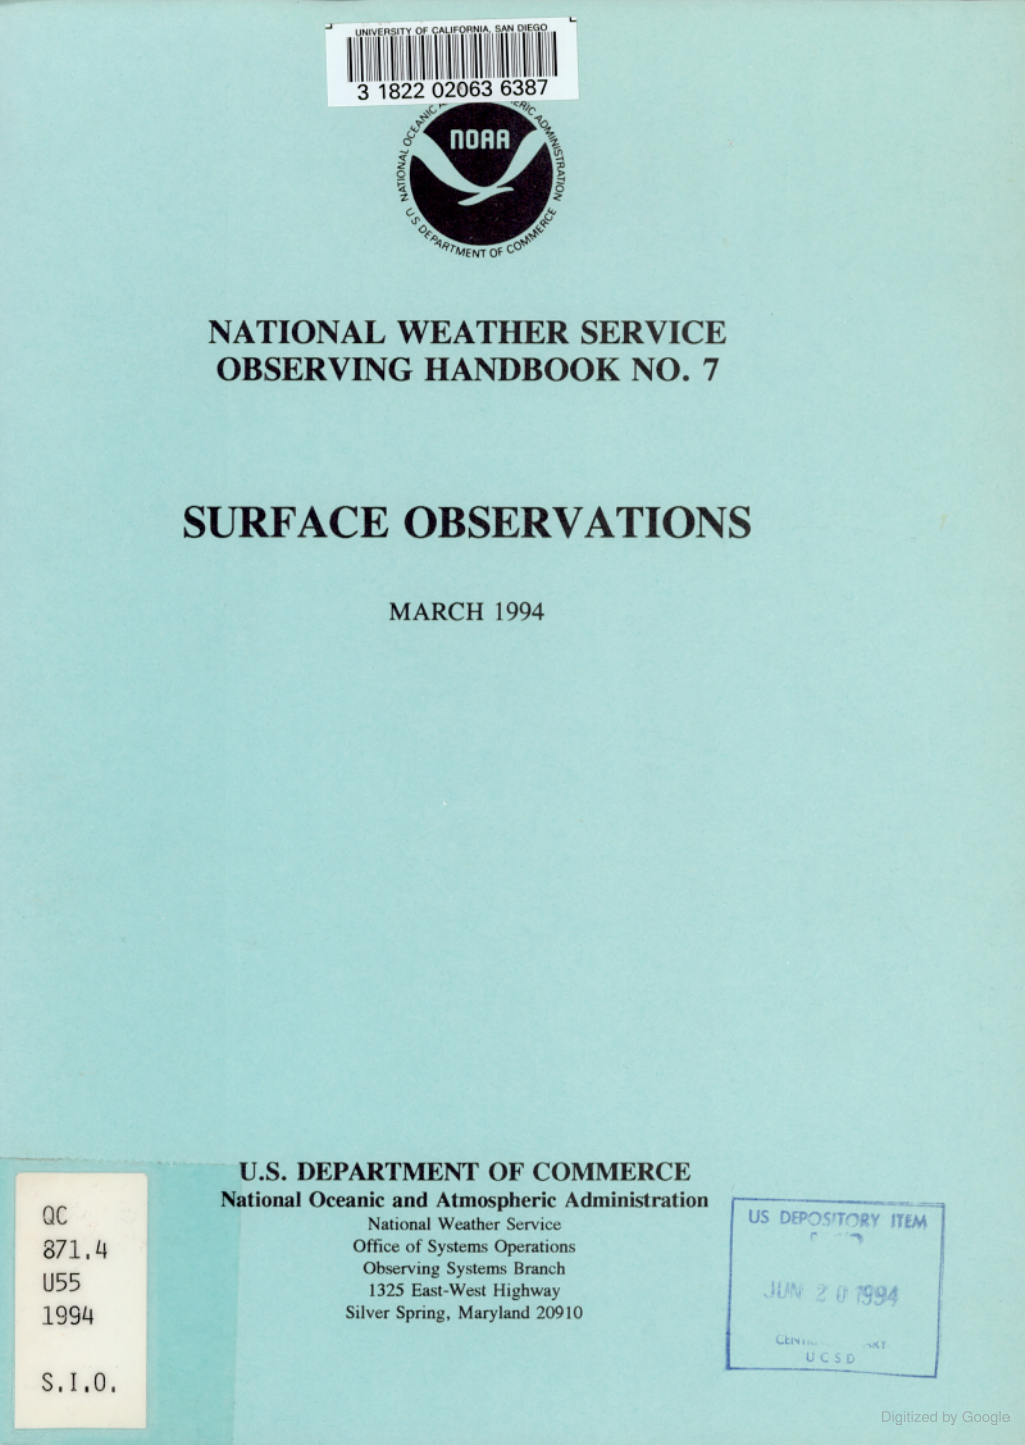 The cover of National Weather Service Observing Handbook No. 7.